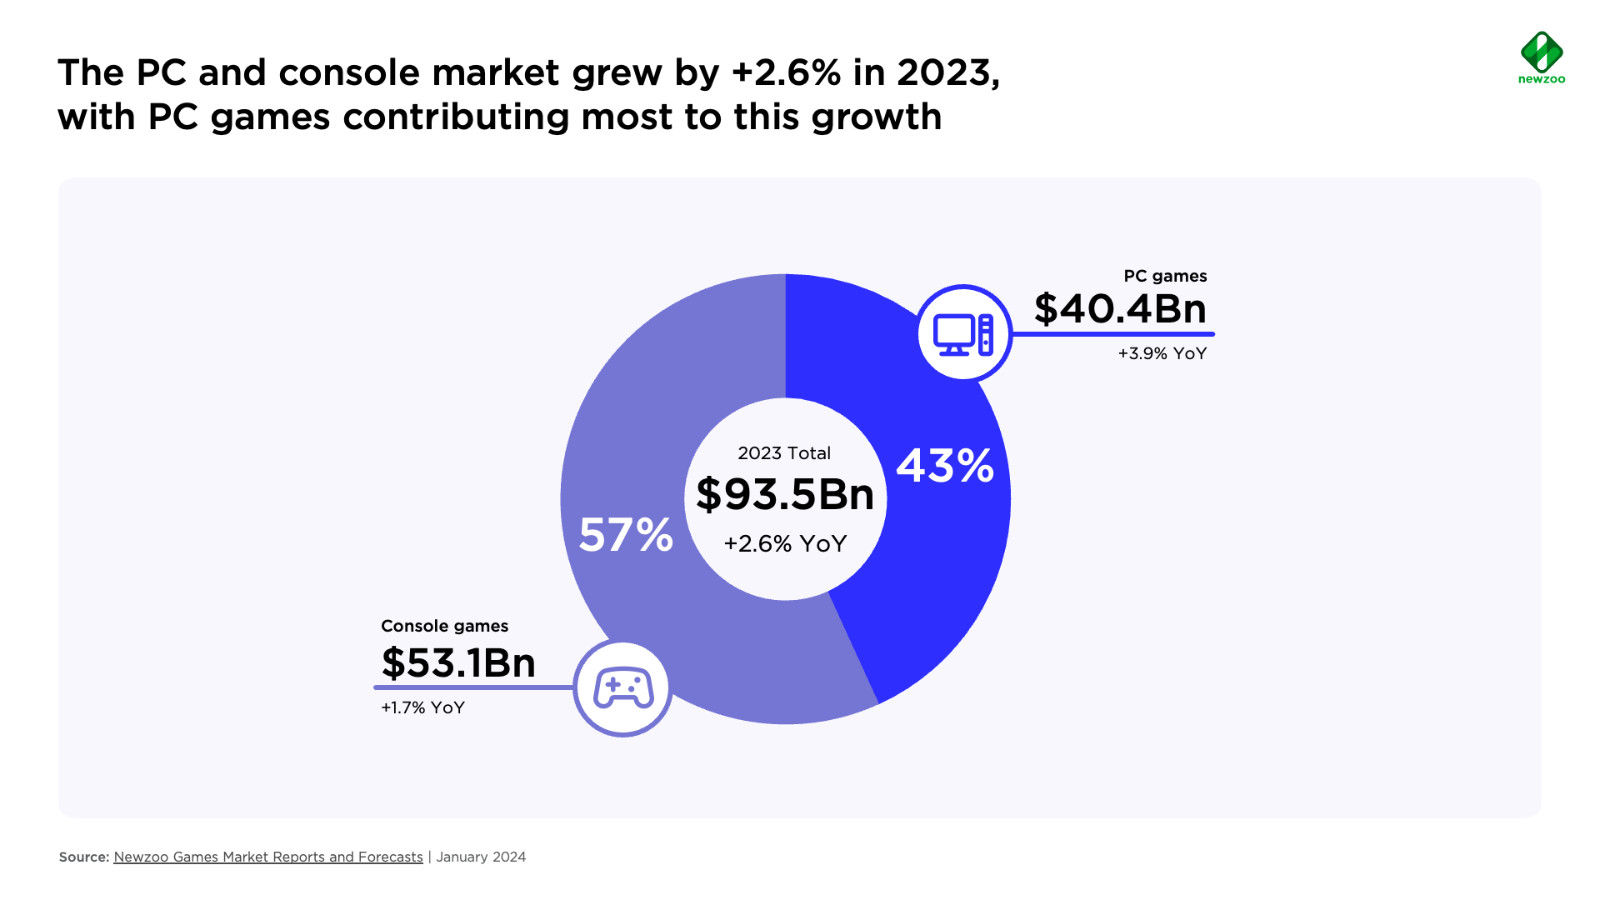 Newzoo-PC-and-console-market-will-grow-2.6